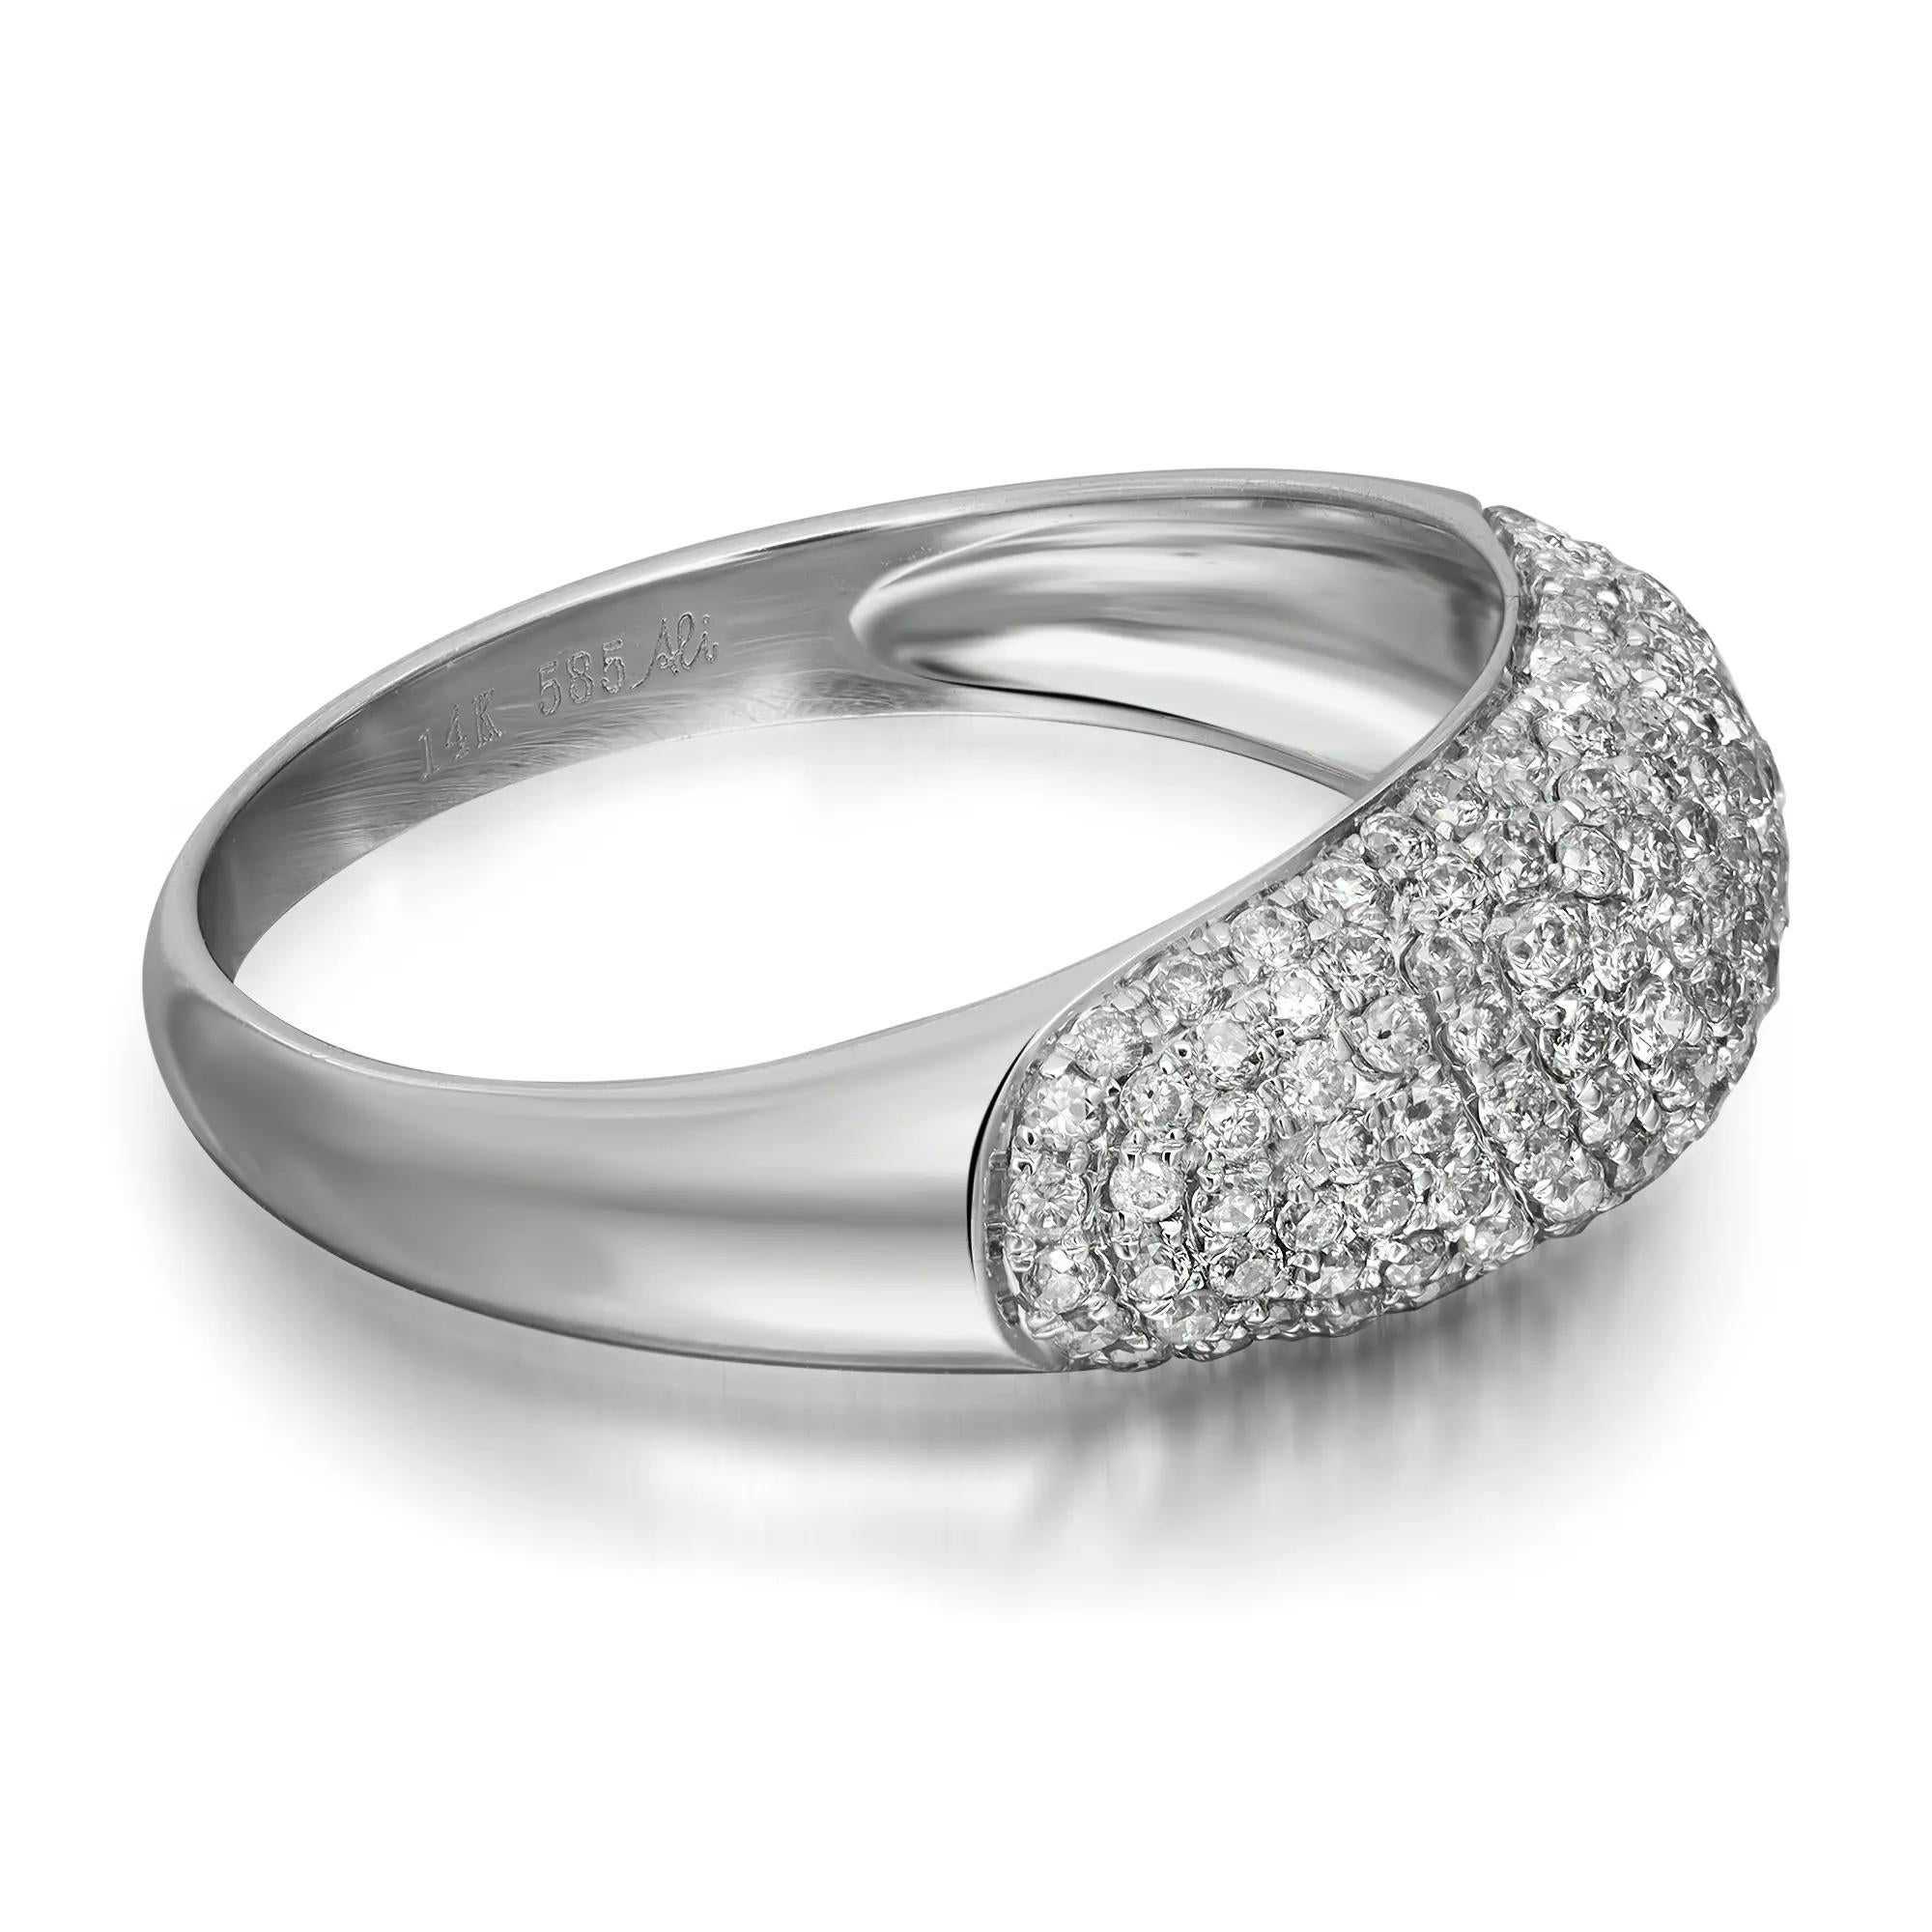 This ring features round brilliant cut diamonds encrusted in pave setting. Crafted in 14k white gold. Total diamond weight: 0.77 carat. Diamond quality: I color and SI1 clarity. Weight: 2.92 grams. Ring size 8. Comes in a presentable gift box.